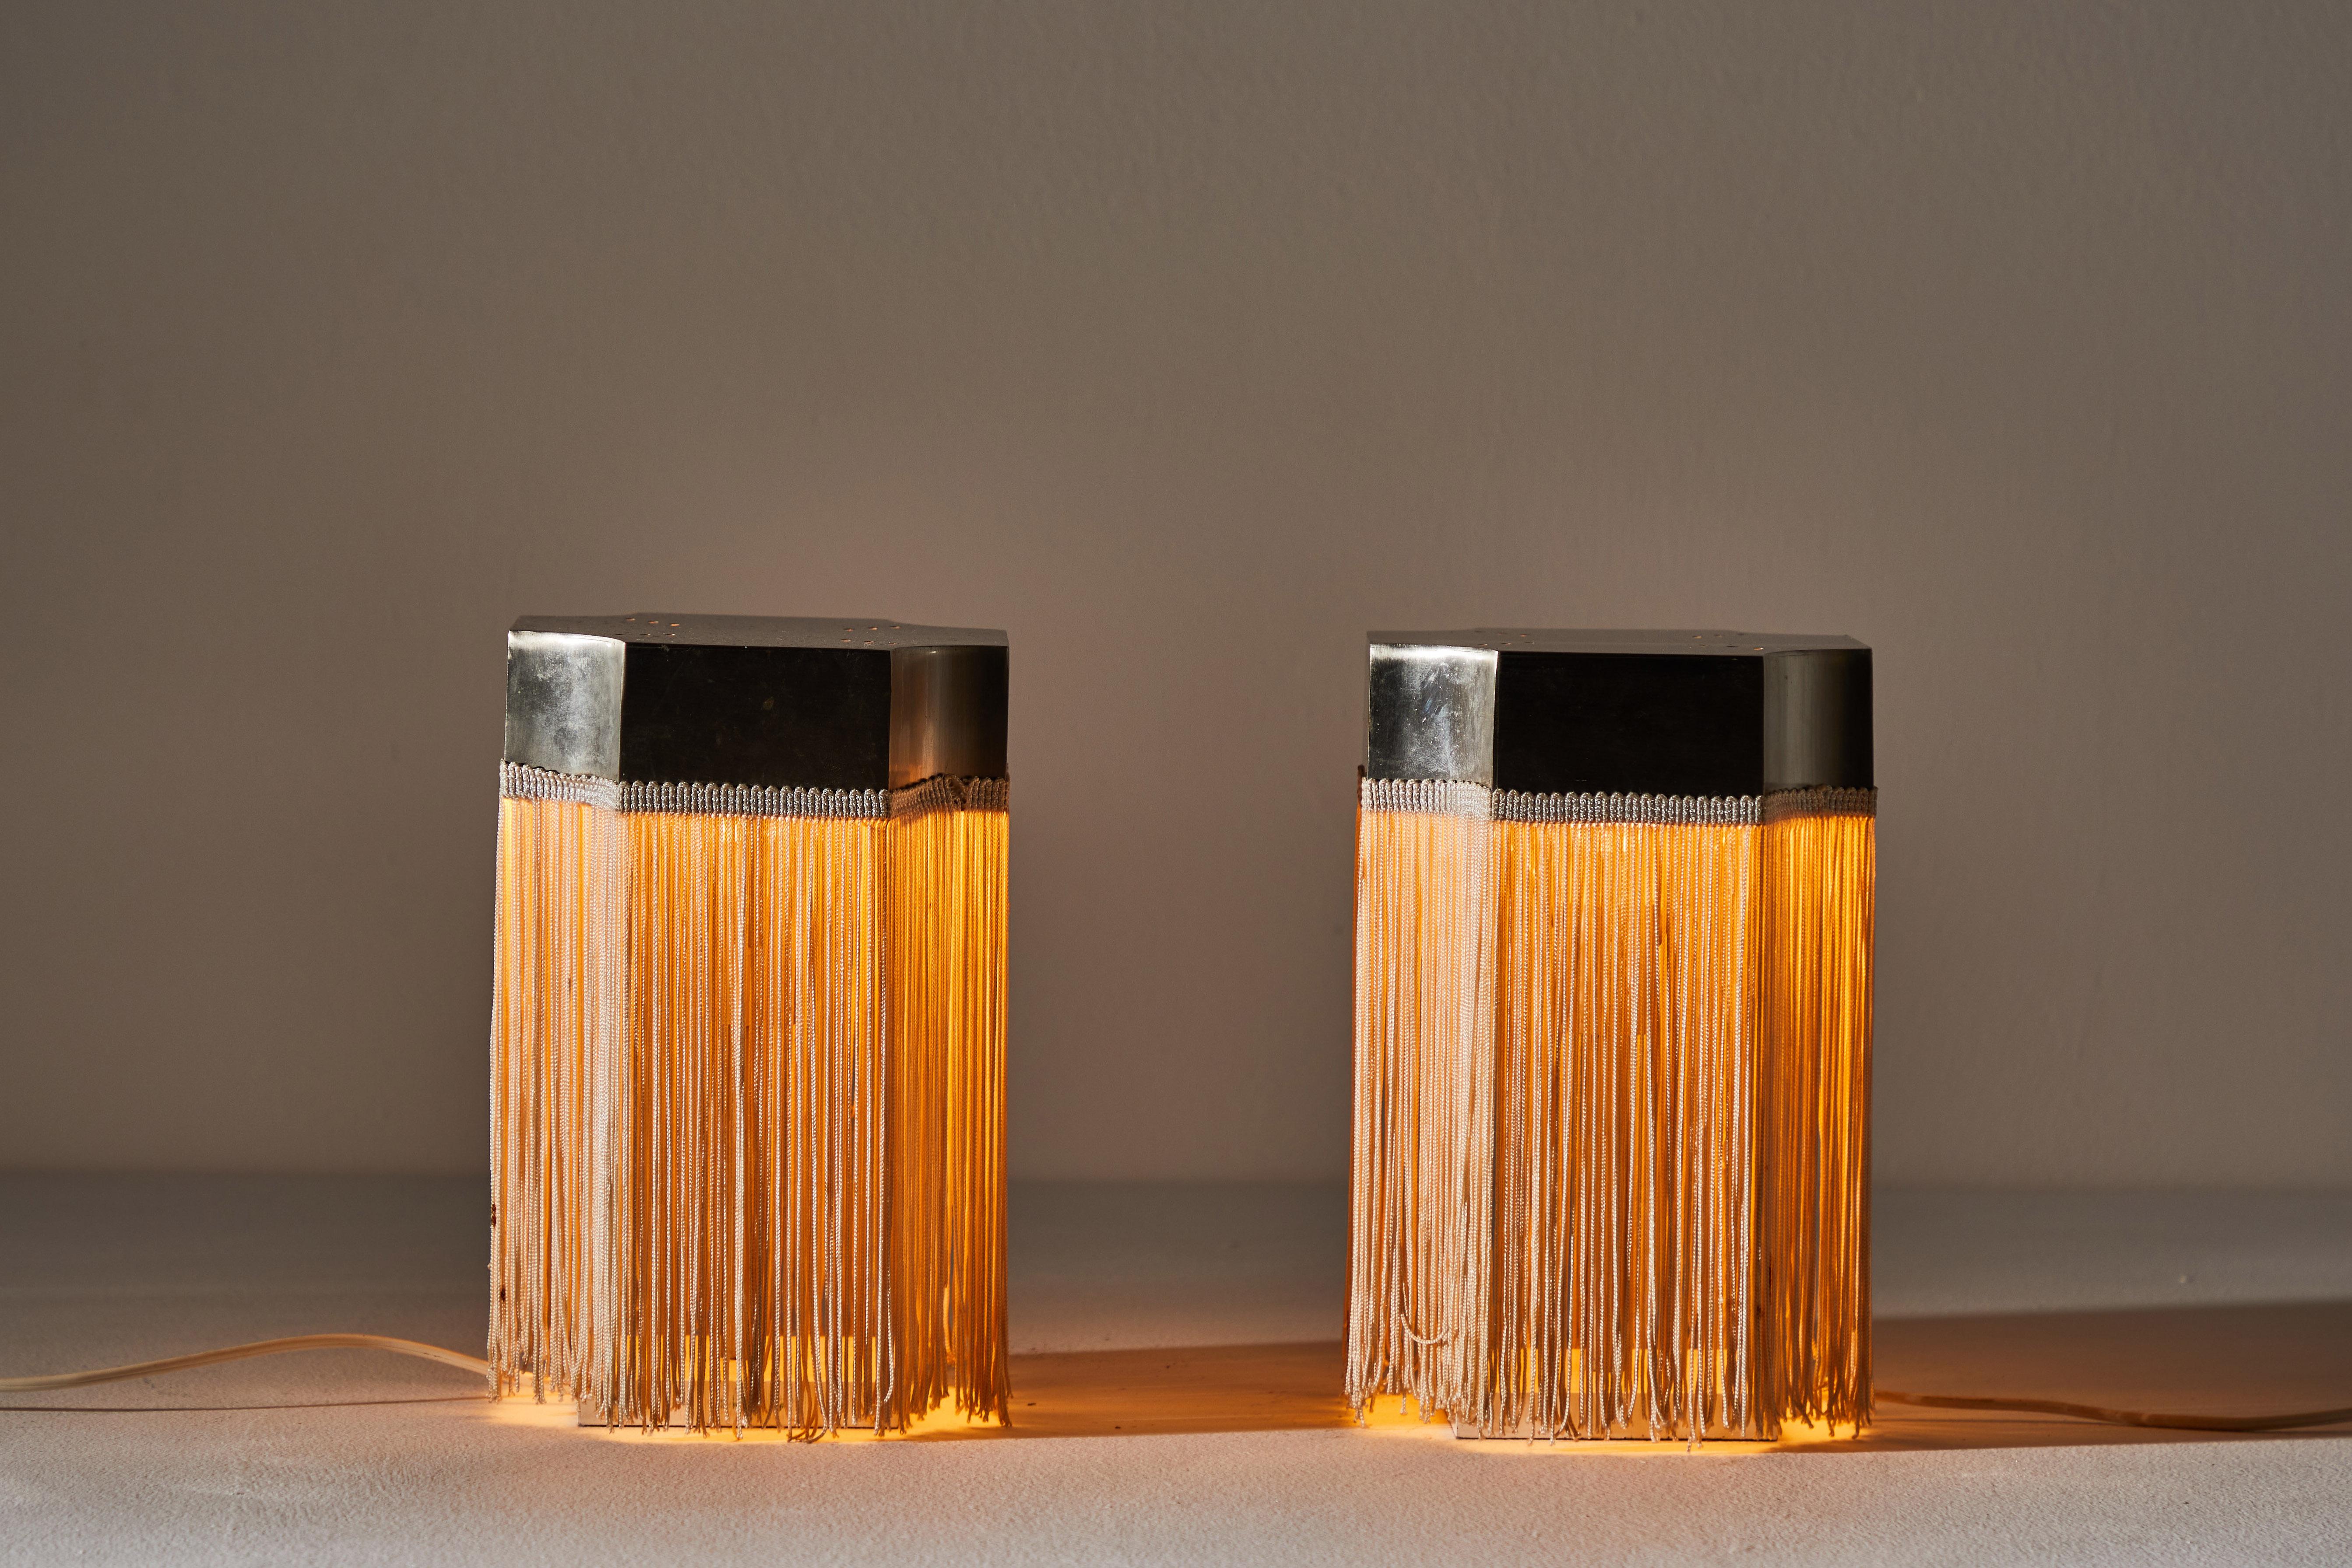 Pair of table lamps by Gianfranco Frattini. Designed and manufactured in Italy, circa 1960s. Aluminum, silk fringe. Original cord. We recommend one E14 40w maximum European candelabra bulb. Bulbs provided as a one time courtesy.